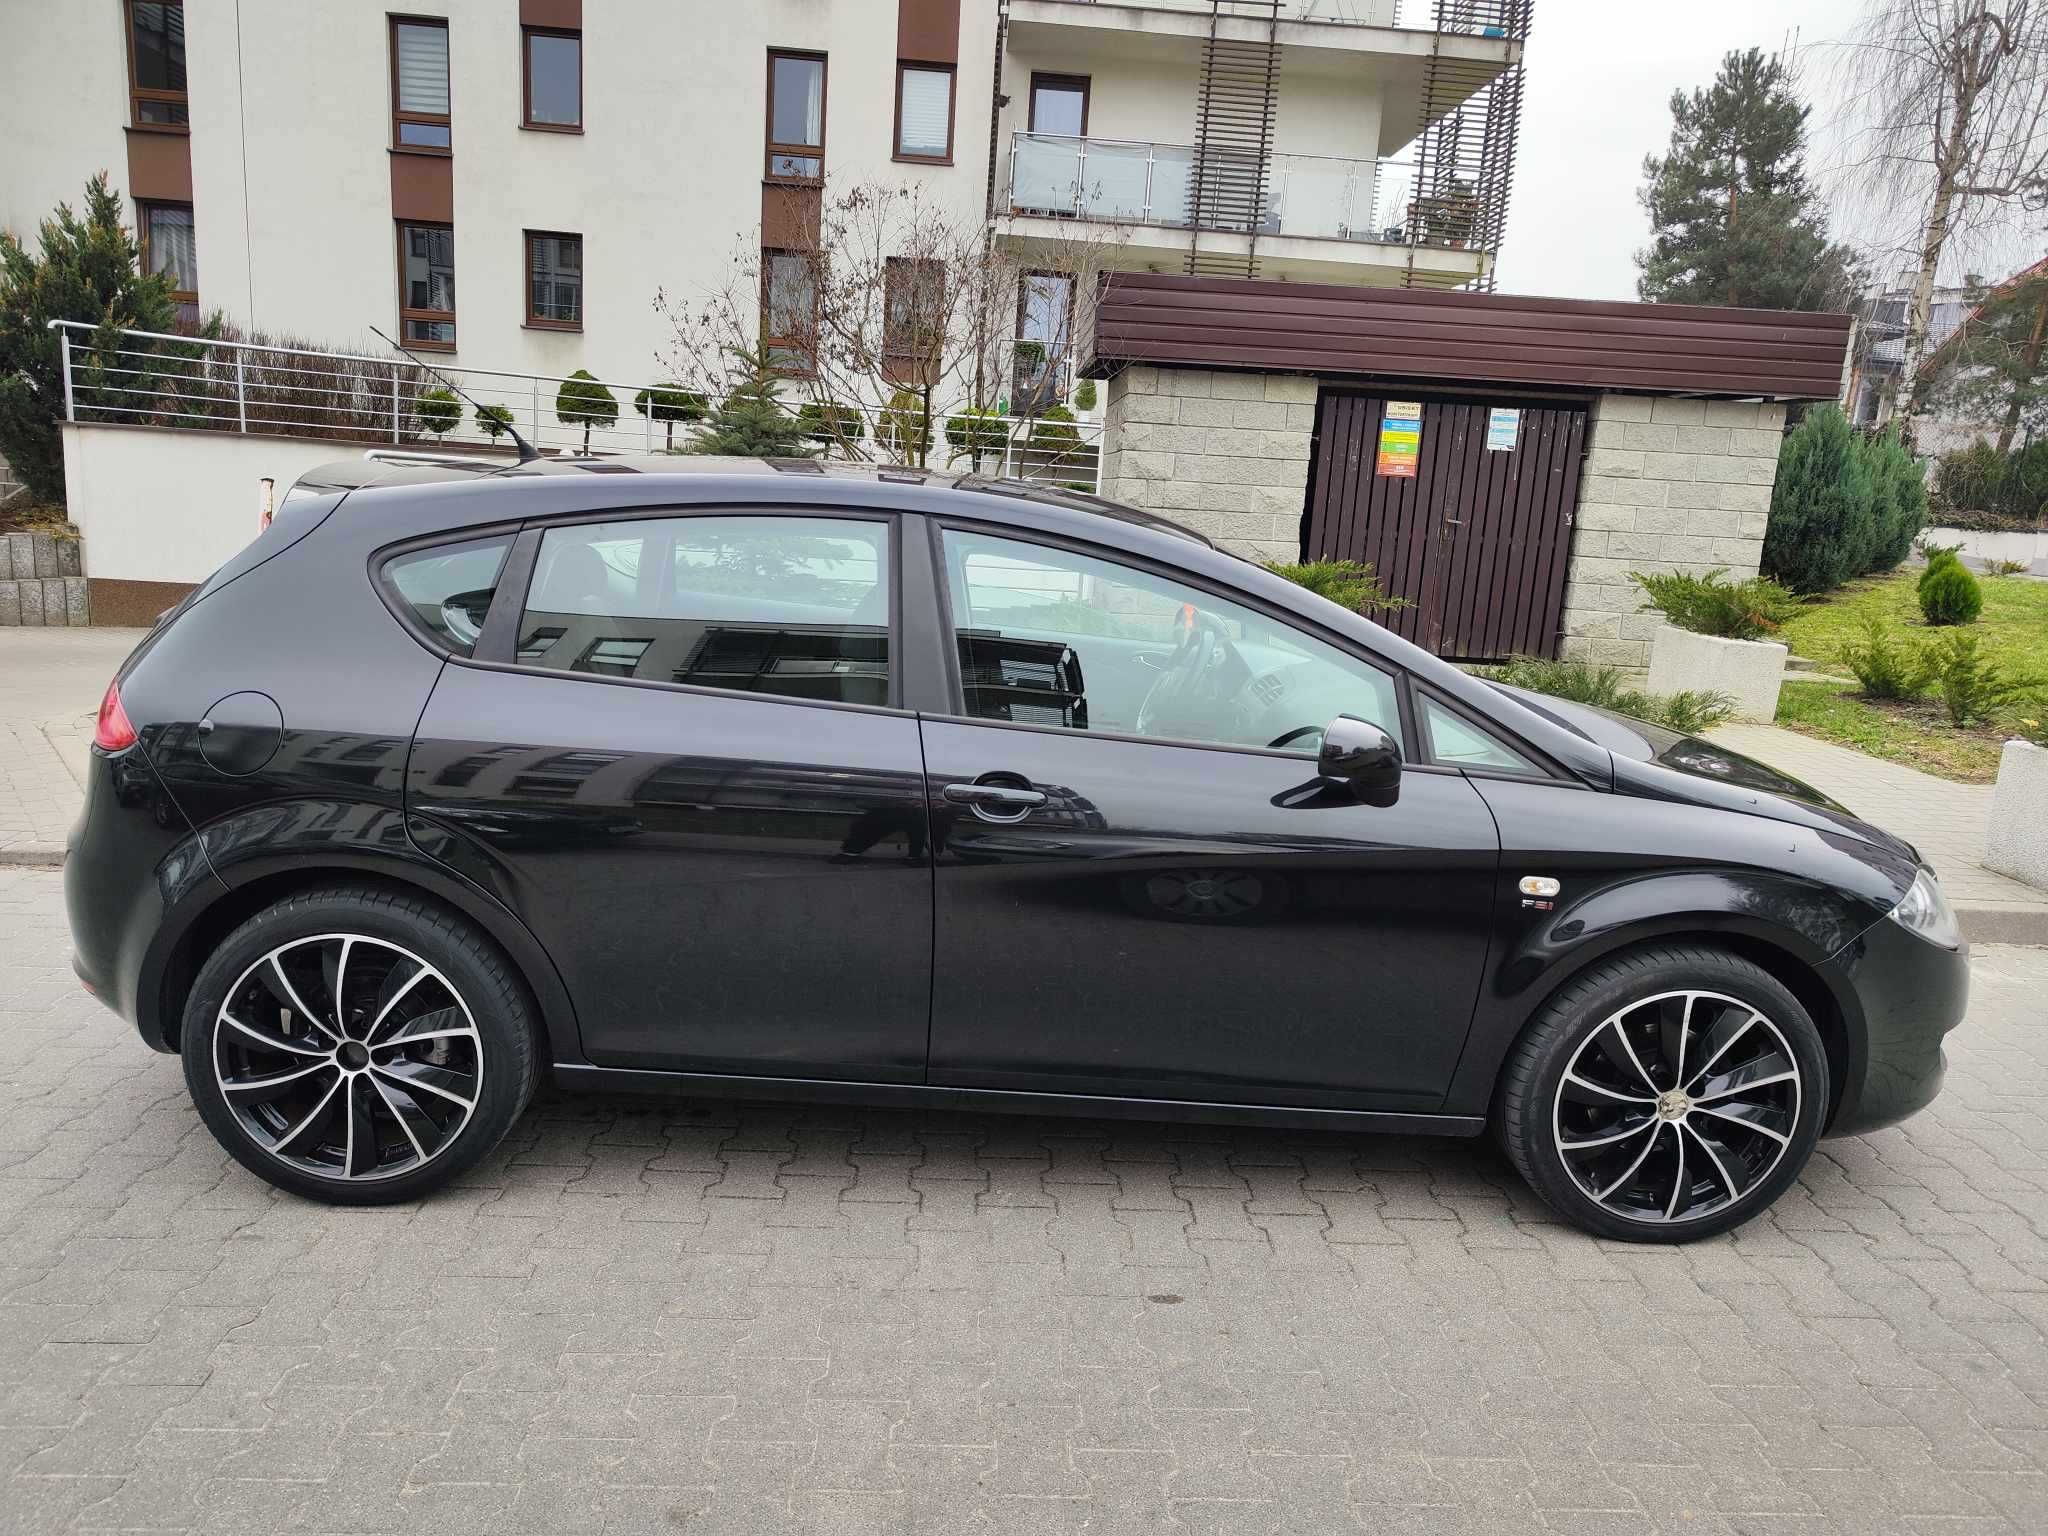 Seat Leon 2006r 2.0 benzyna 150KM Android Lakier Oryginał